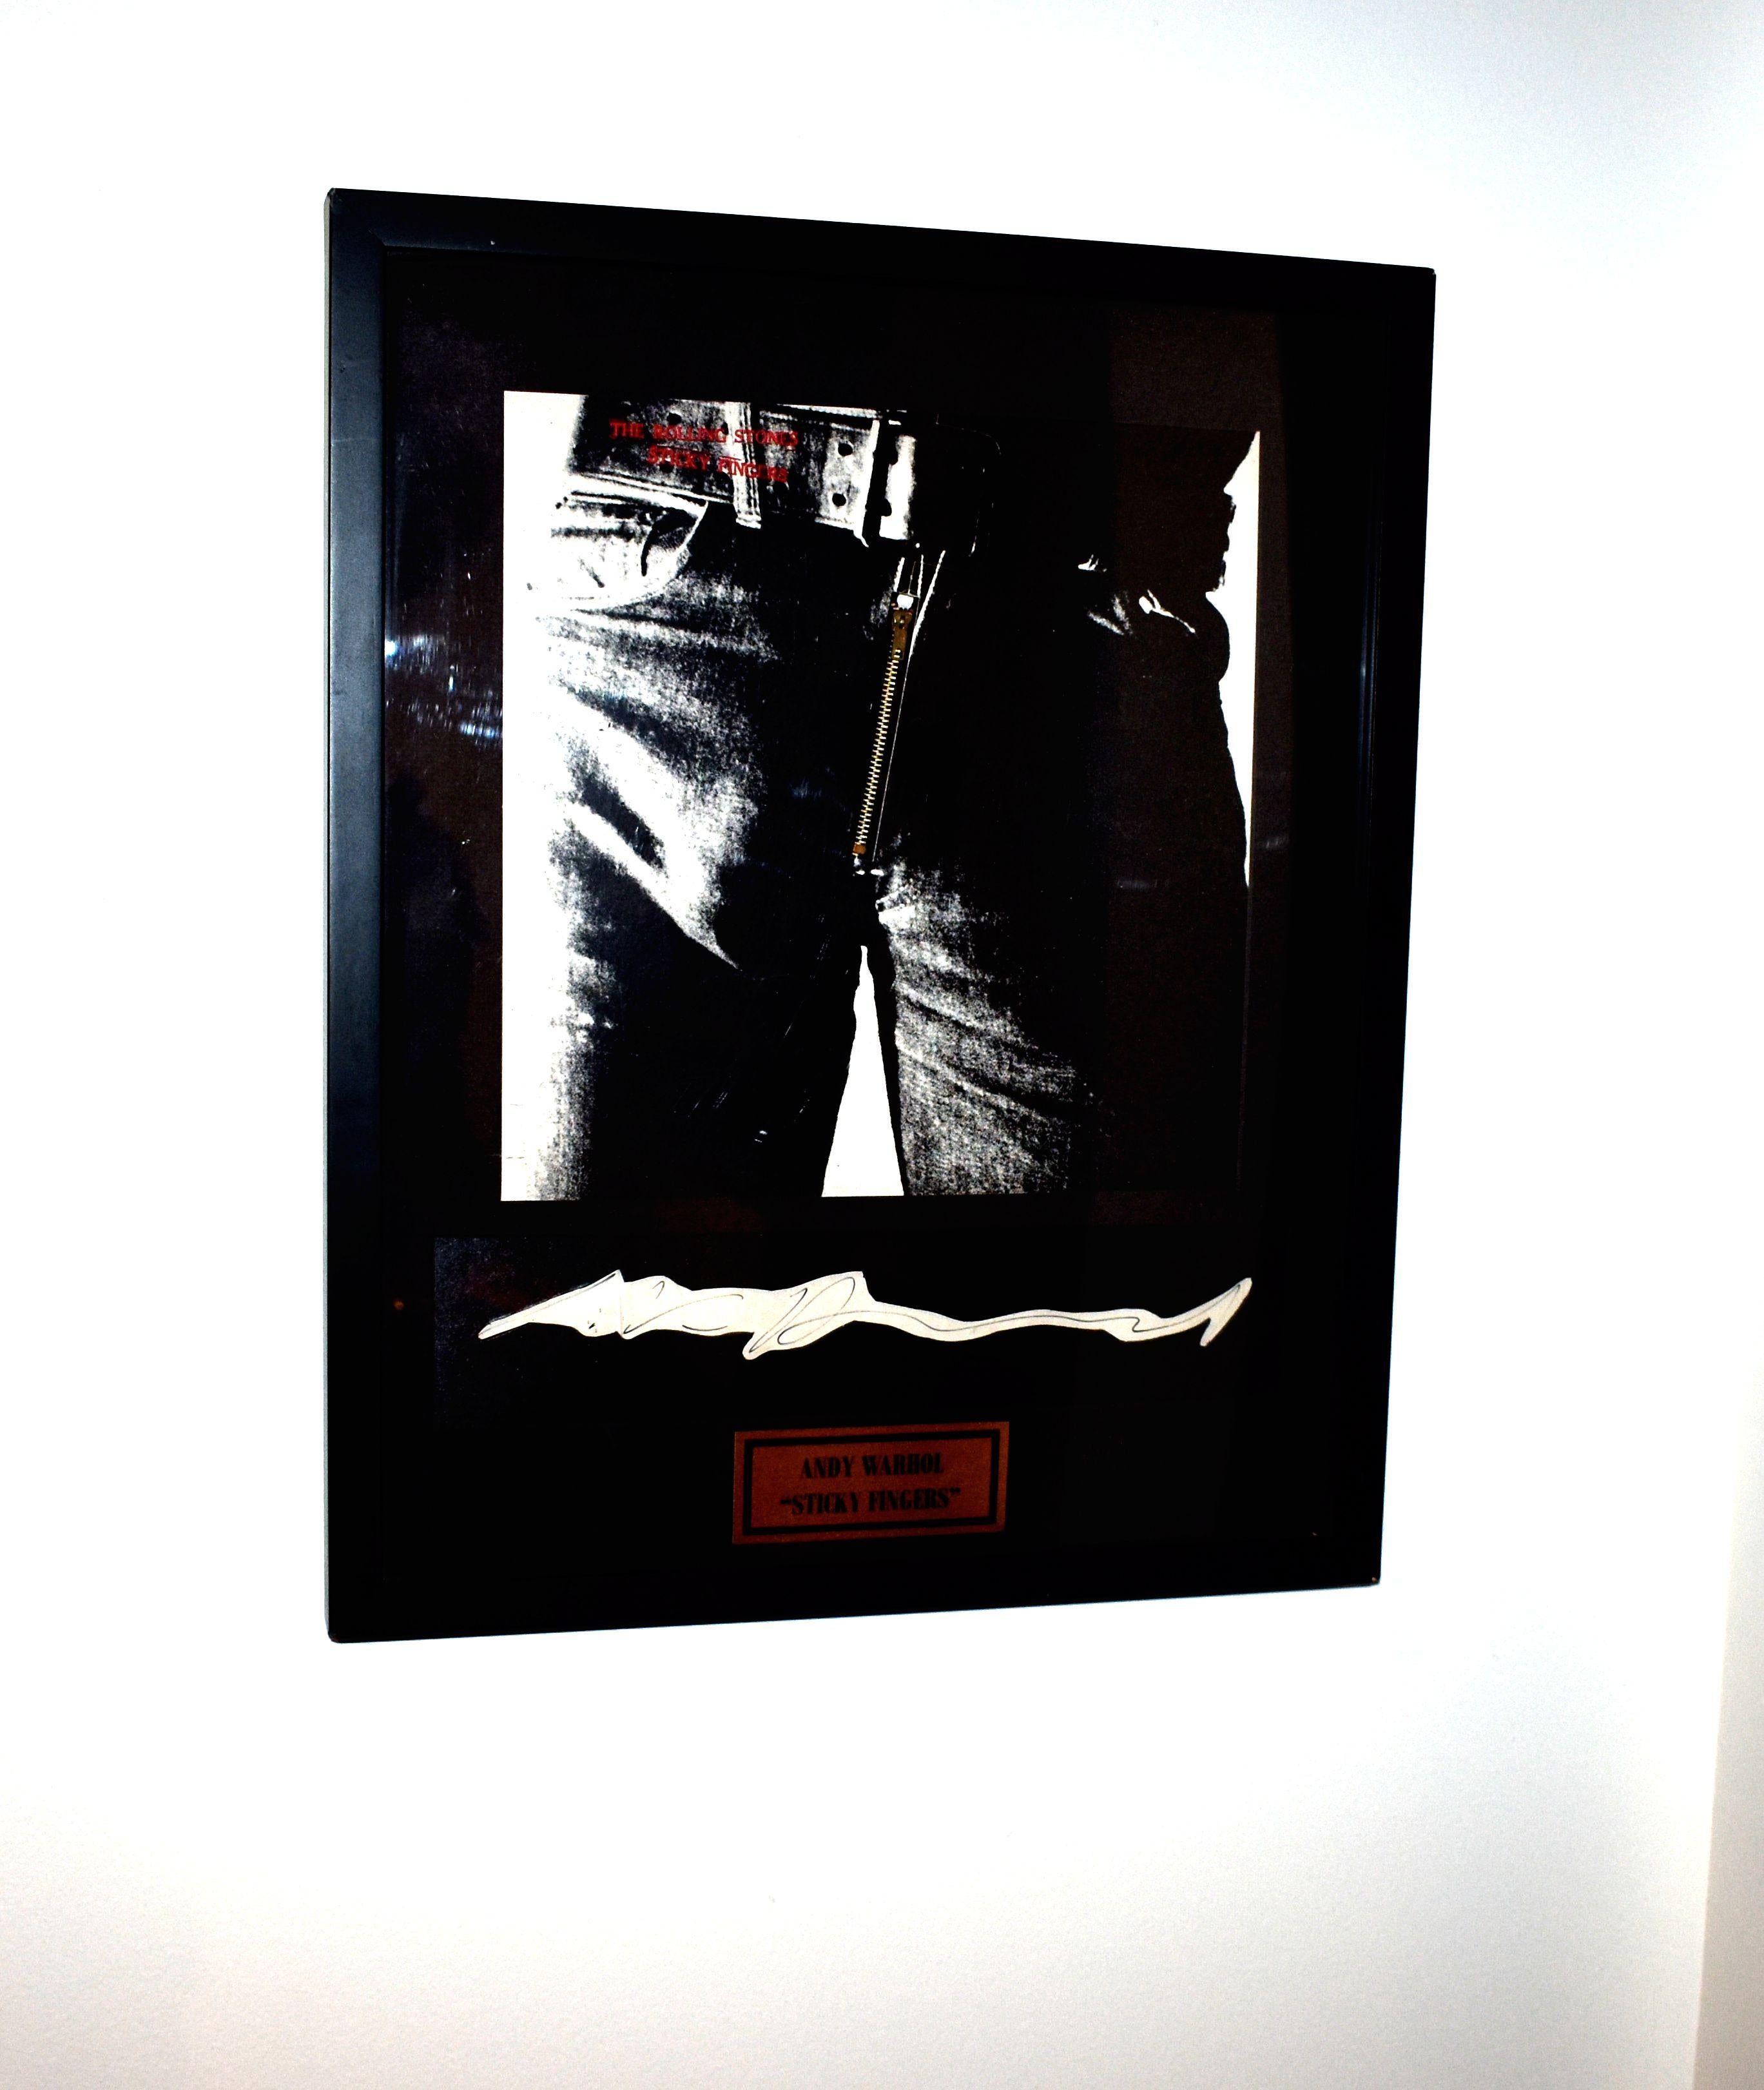 An original zipper copy of Sticky fingers signed by the pop-art legend Andy Warhol who was responsible for the album artwork. Mounted framed.
 Rolling stones 'sticky fingers' album and photographic album cover w/zipper designed by Andy Warhol